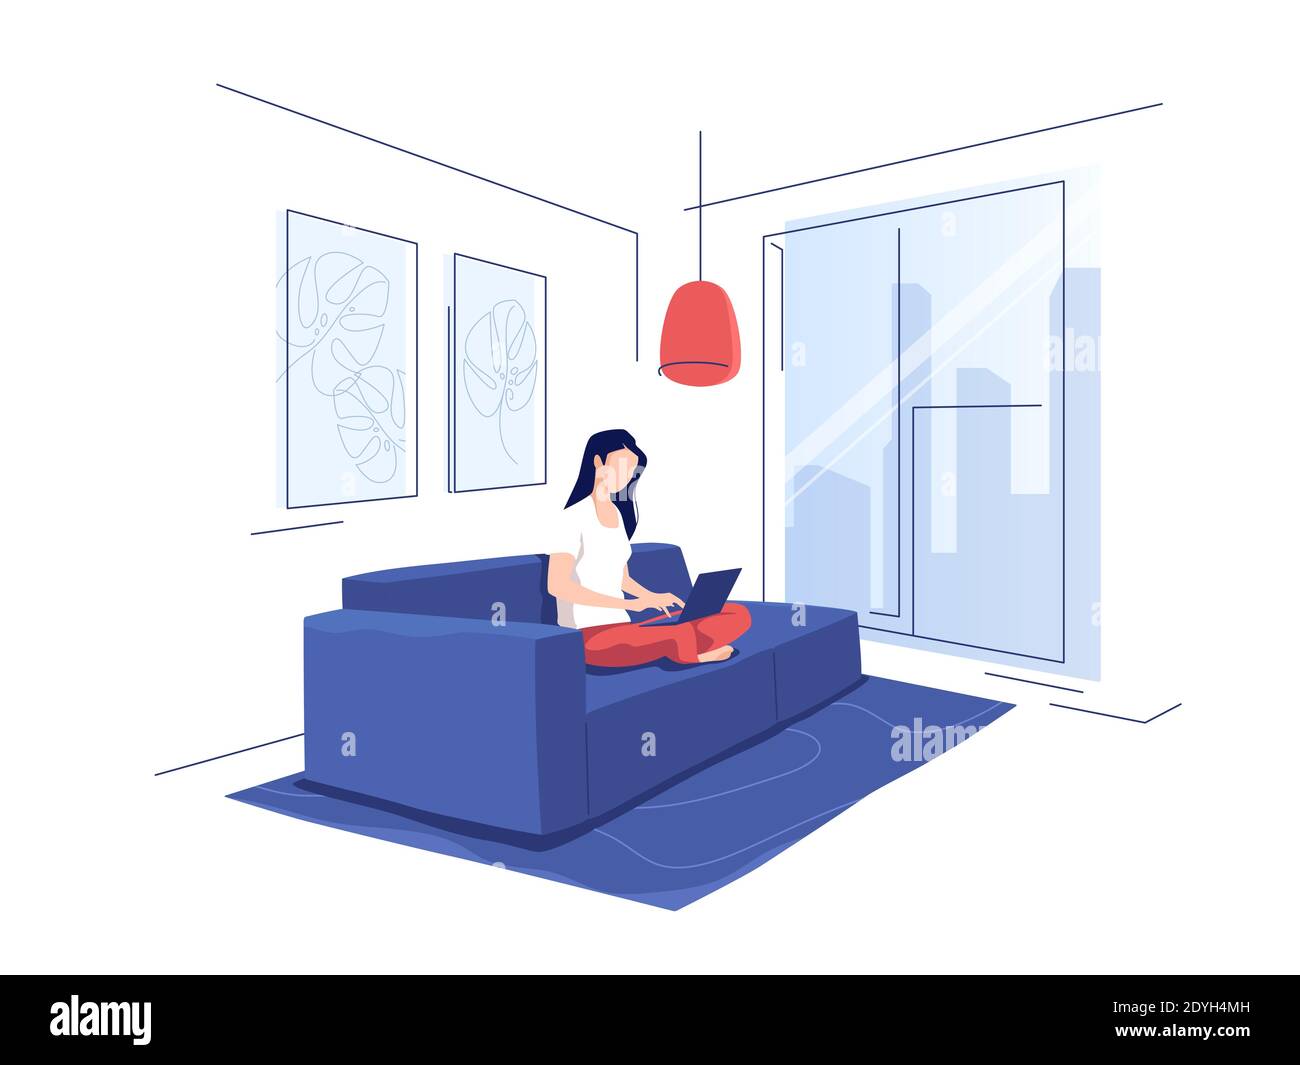 Vector illustration depicting a young girl in a modern interior using a laptop while sitting on a home sofa Stock Vector